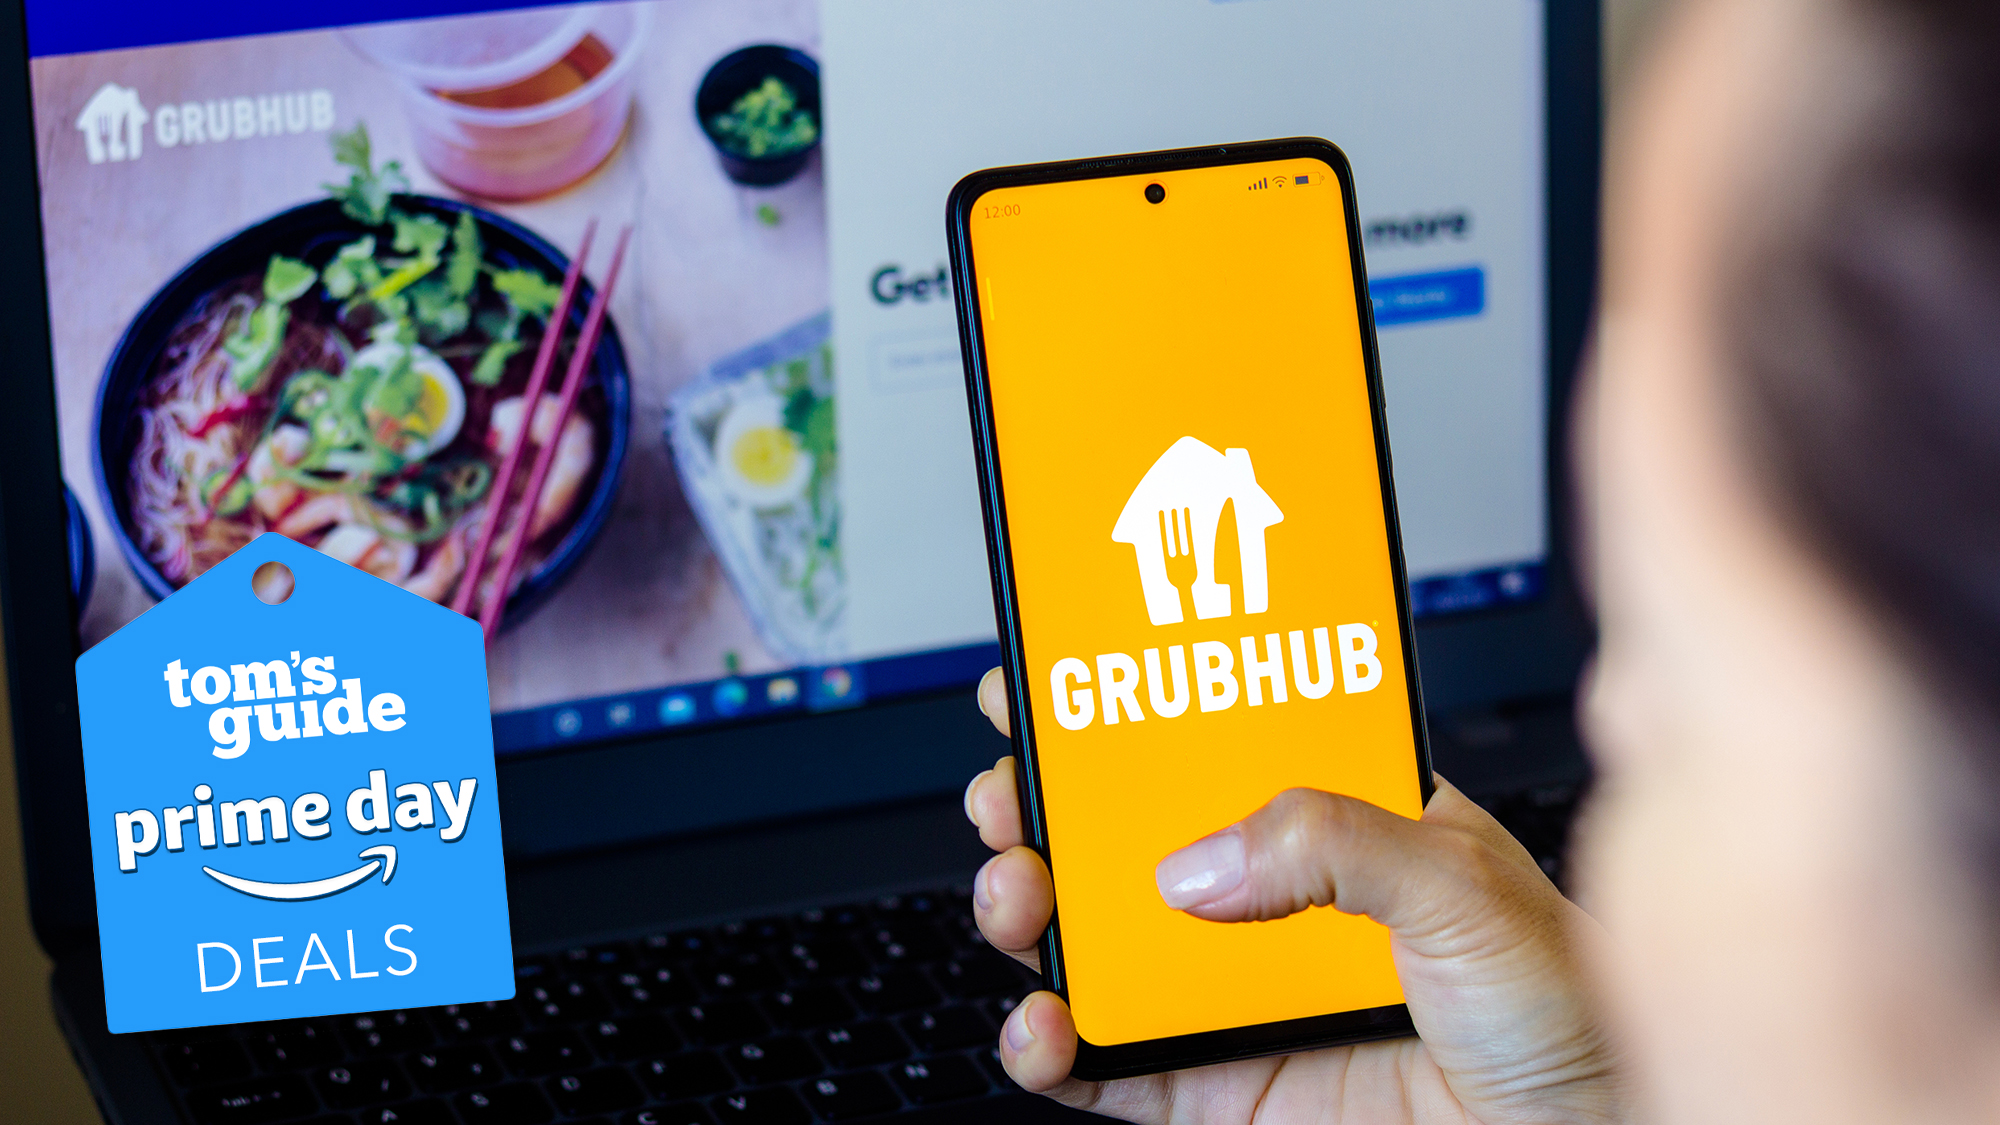 A phone with a Grubhub logo is in hand above a laptop with the Grubhub site